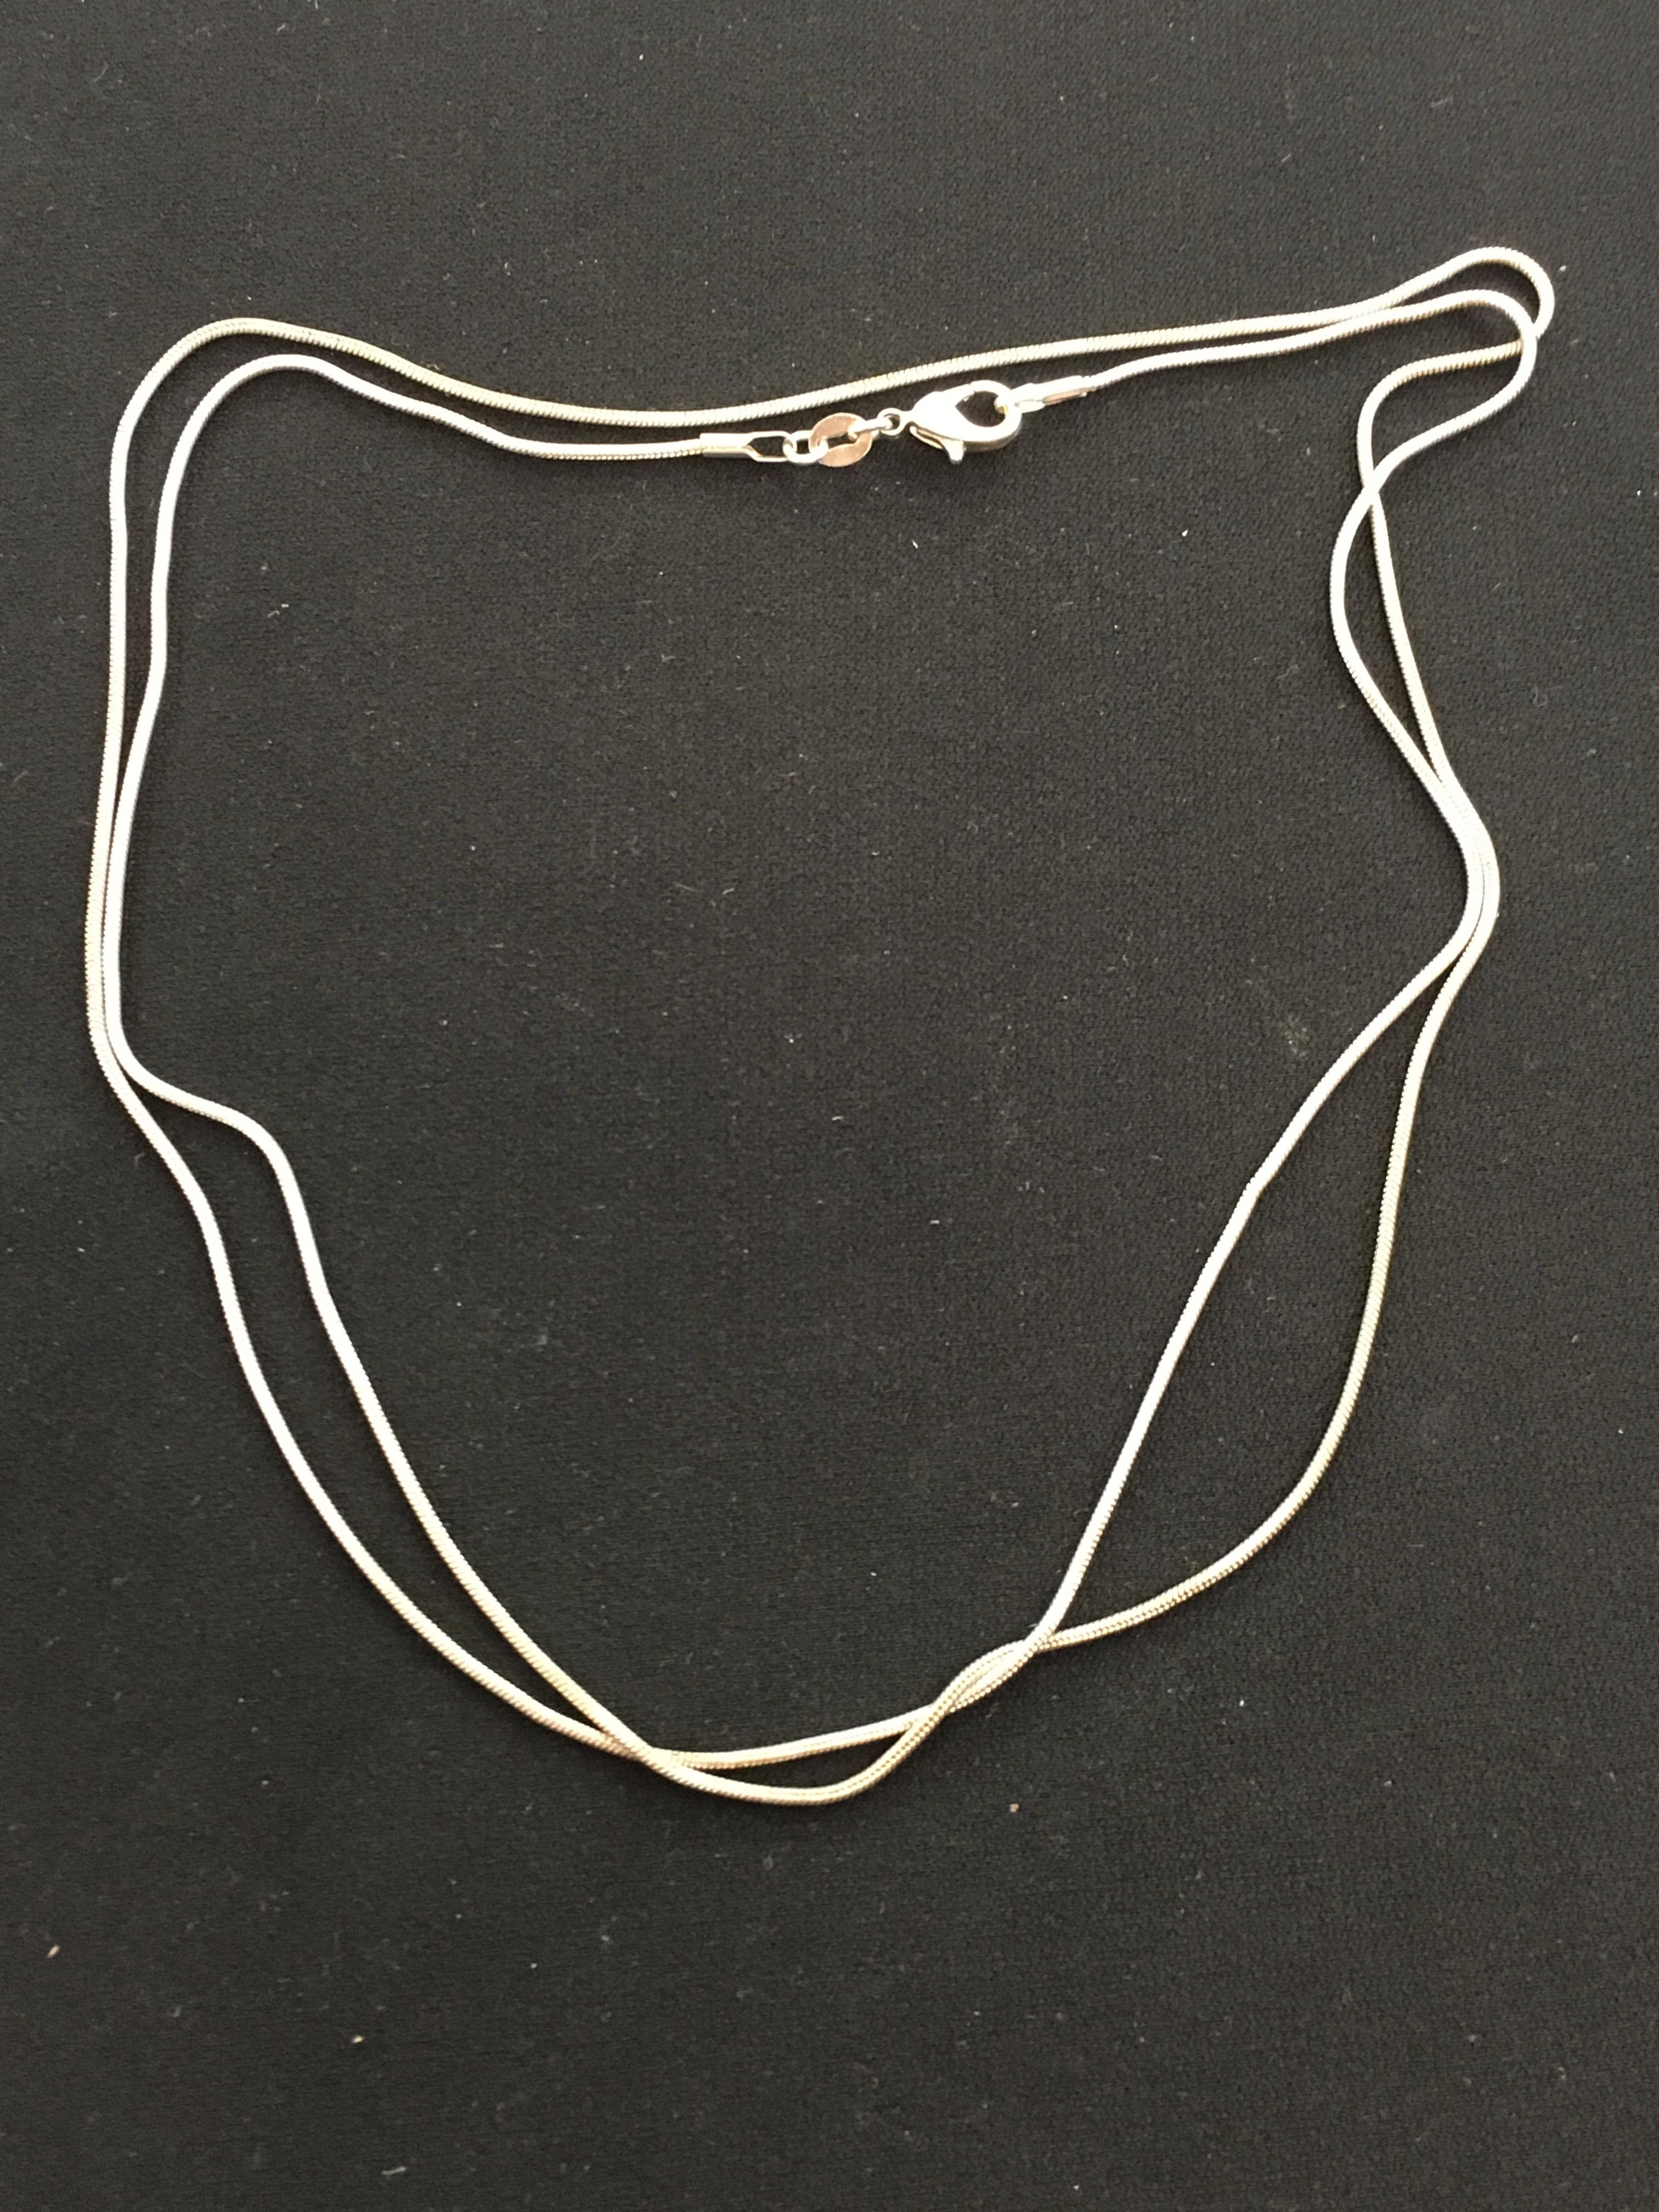 Long 32" Sterling Silver Snake Chain w/ Lobster Claw Clasp